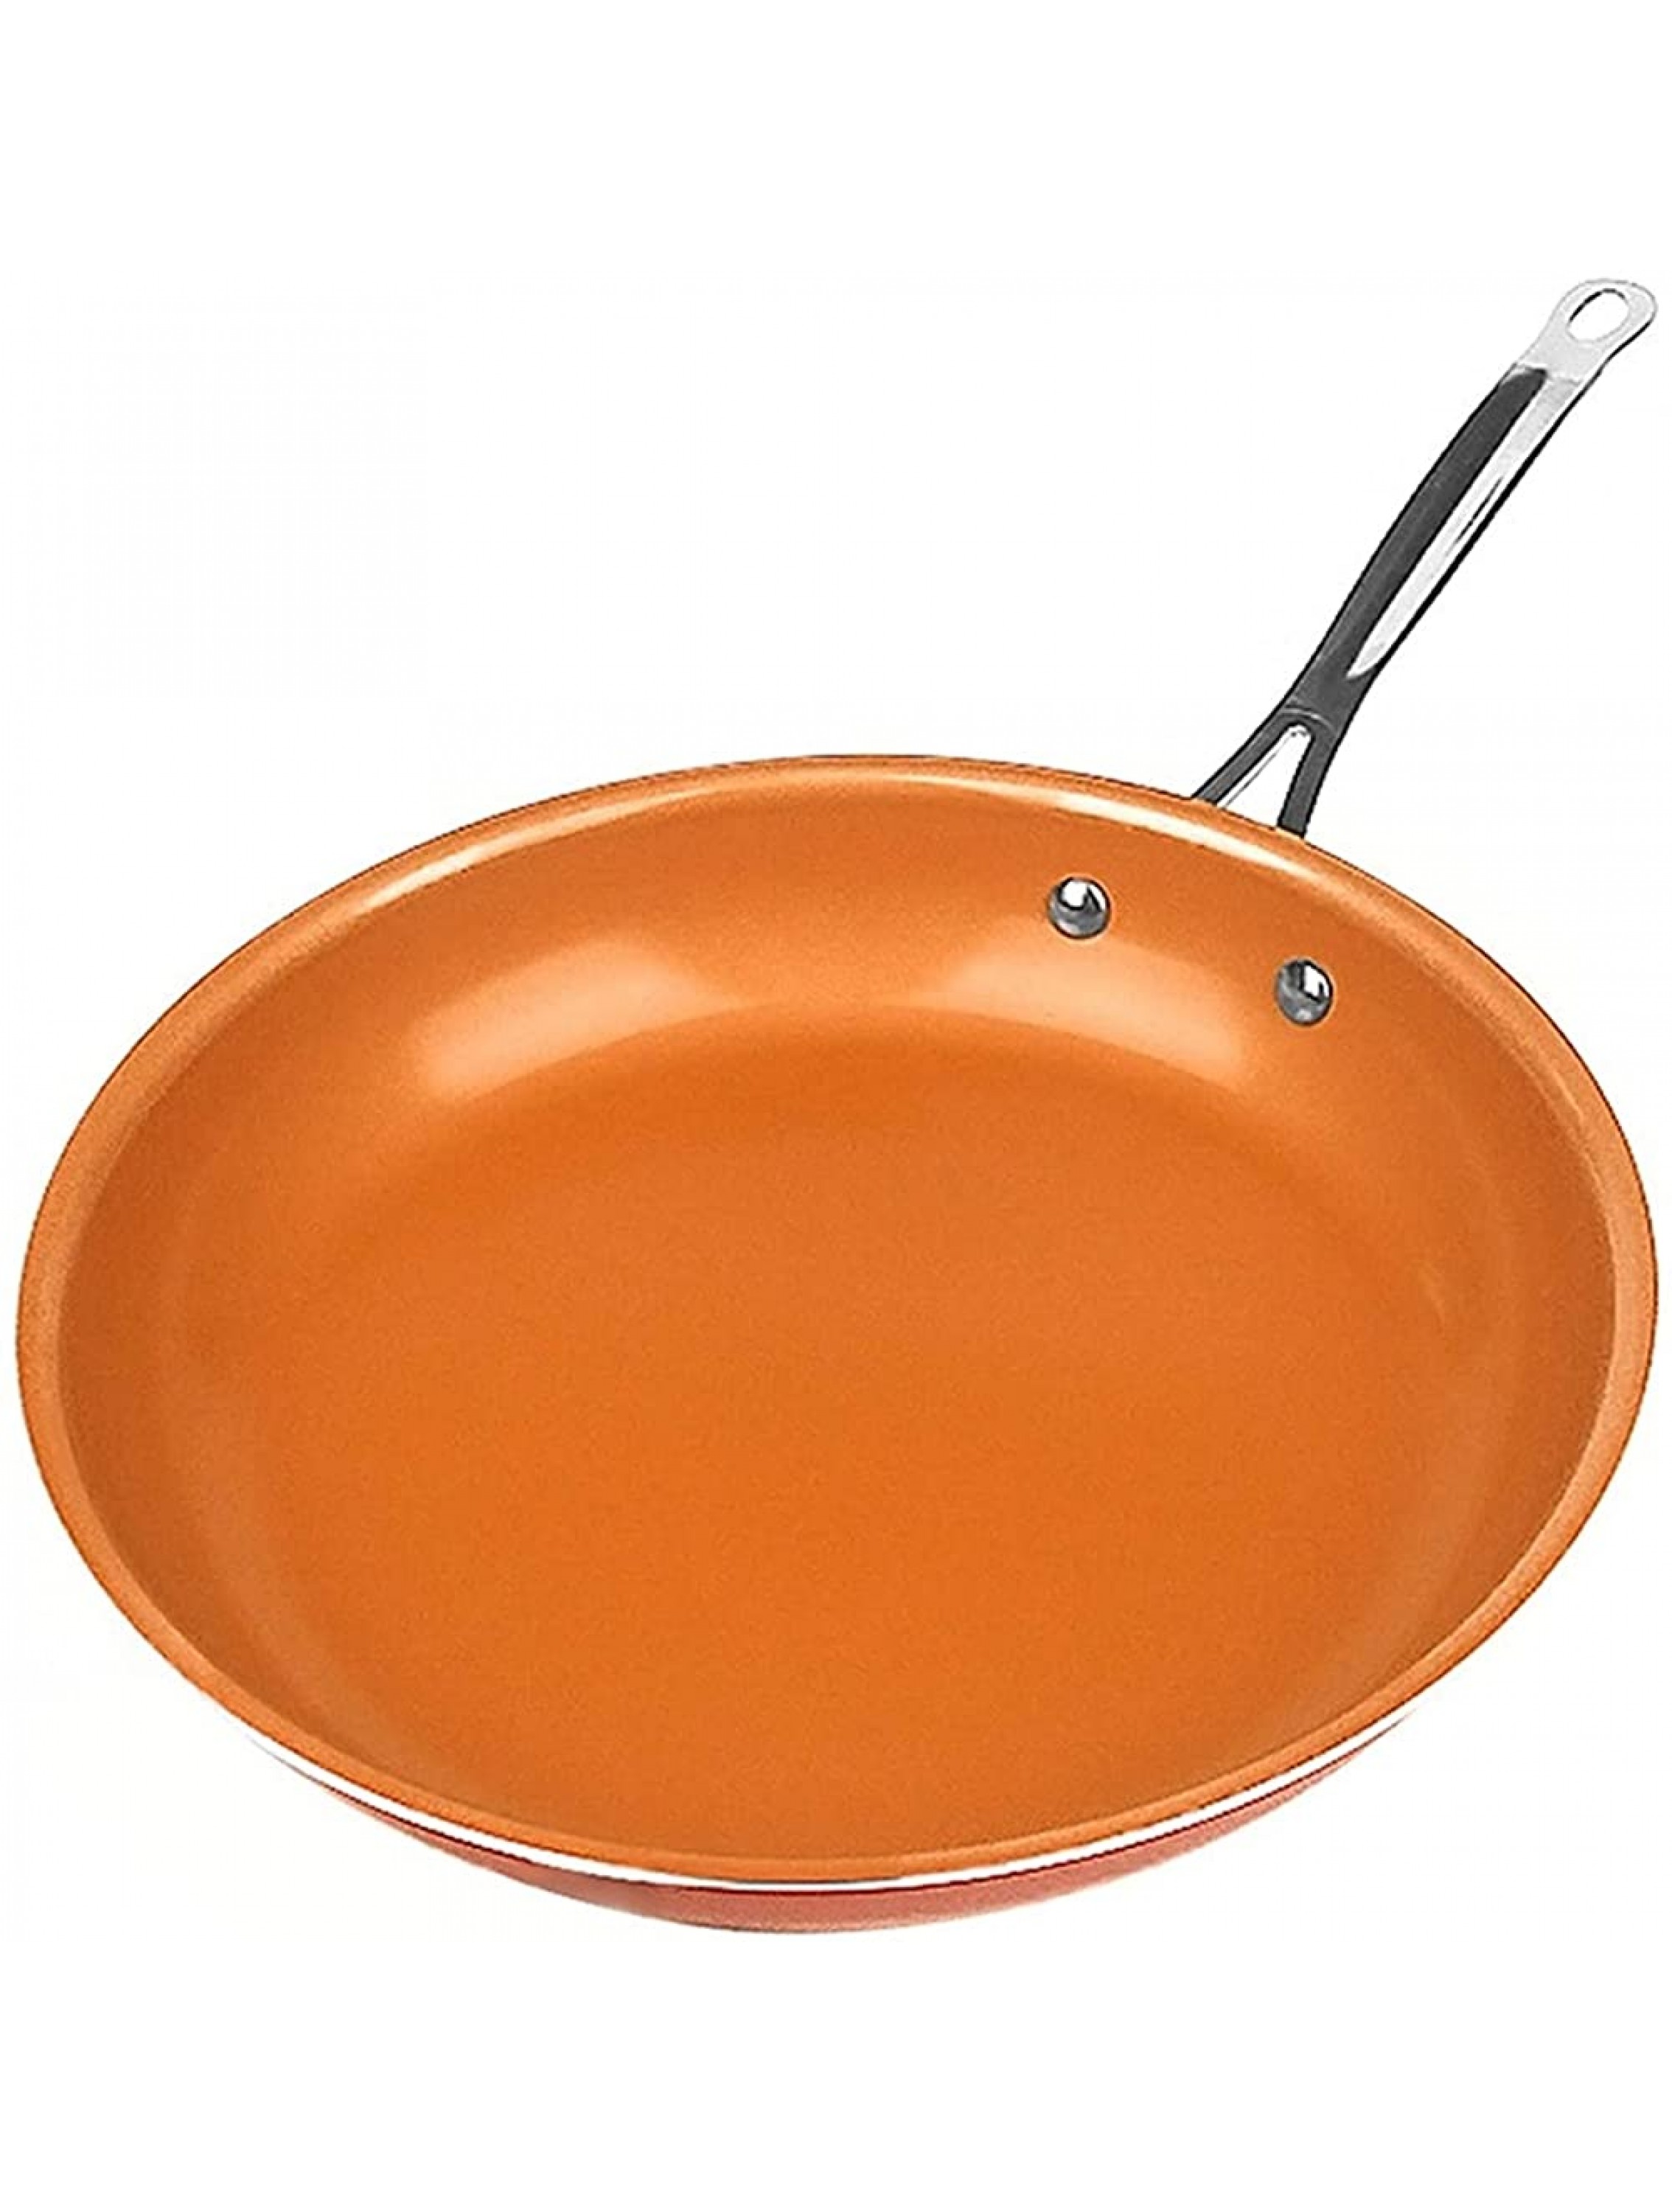 Non-stick Copper Frying Pans Skillets With Ceramic Coating Induction Cooking Oven Cooking Pot Nonstick Pan Cookware Chef Pan cookware pan Color : 28cm - BEPUJ7EVU